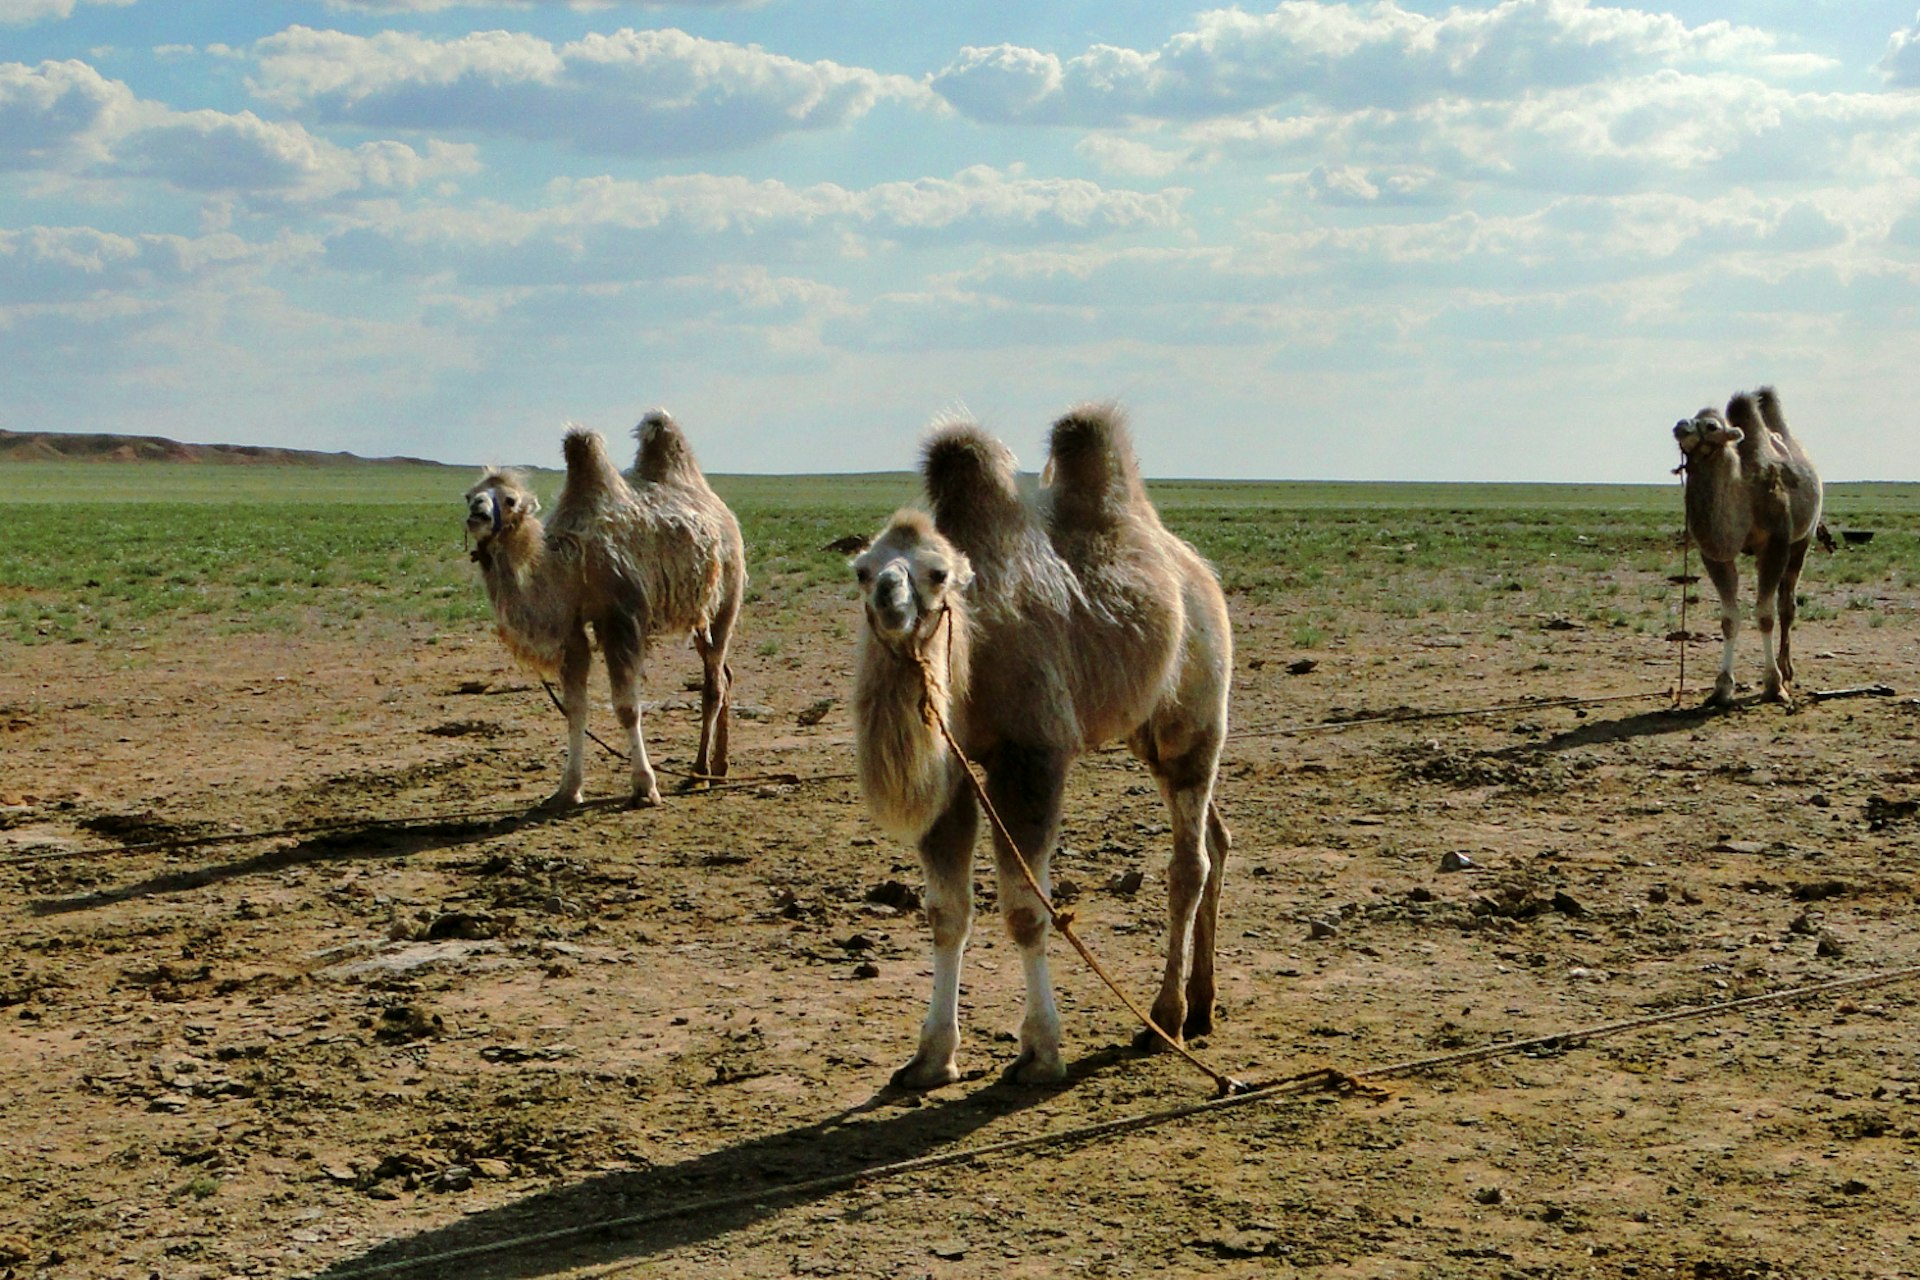 Camels are a vital resource in the Gobi, providing curd-cheese, an acquired taste. Image by Stephen Lioy / Lonely Planet